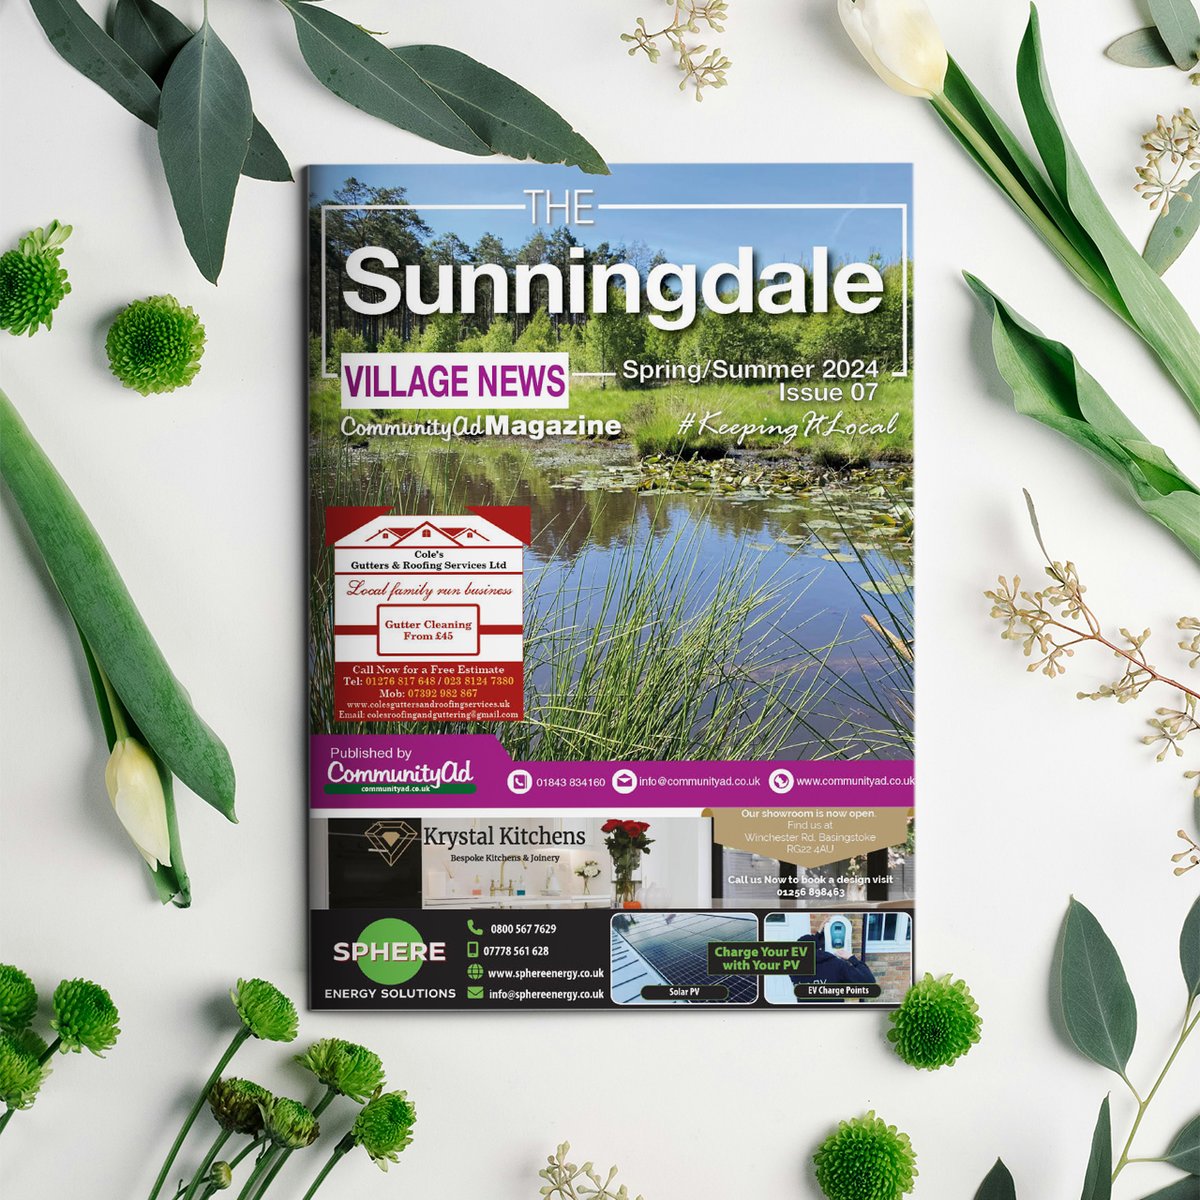 🌿 Excited to dive into the latest edition of Sunningdale Village News Magazine! 📖 Can't wait to soak up some inspiration and feel-good stories! 🌱 communityad.co.uk/back-issues/su… #Sunningdale #local #community #news #events #story #storytime #localevents #localbusiness